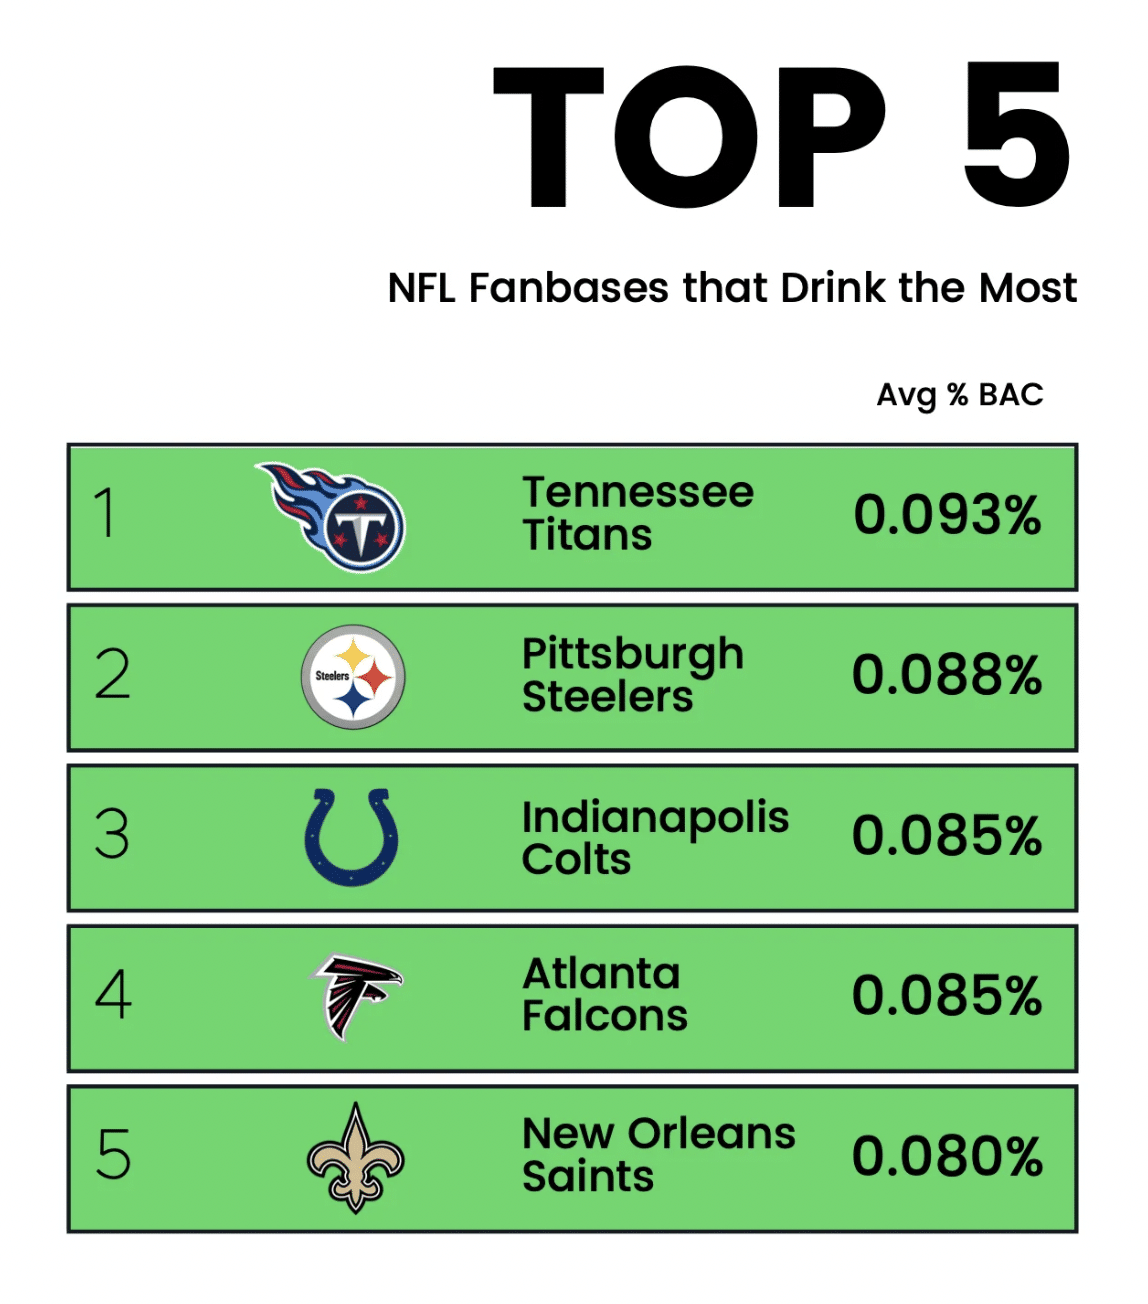 Top 5 NFL teams that drink the most.